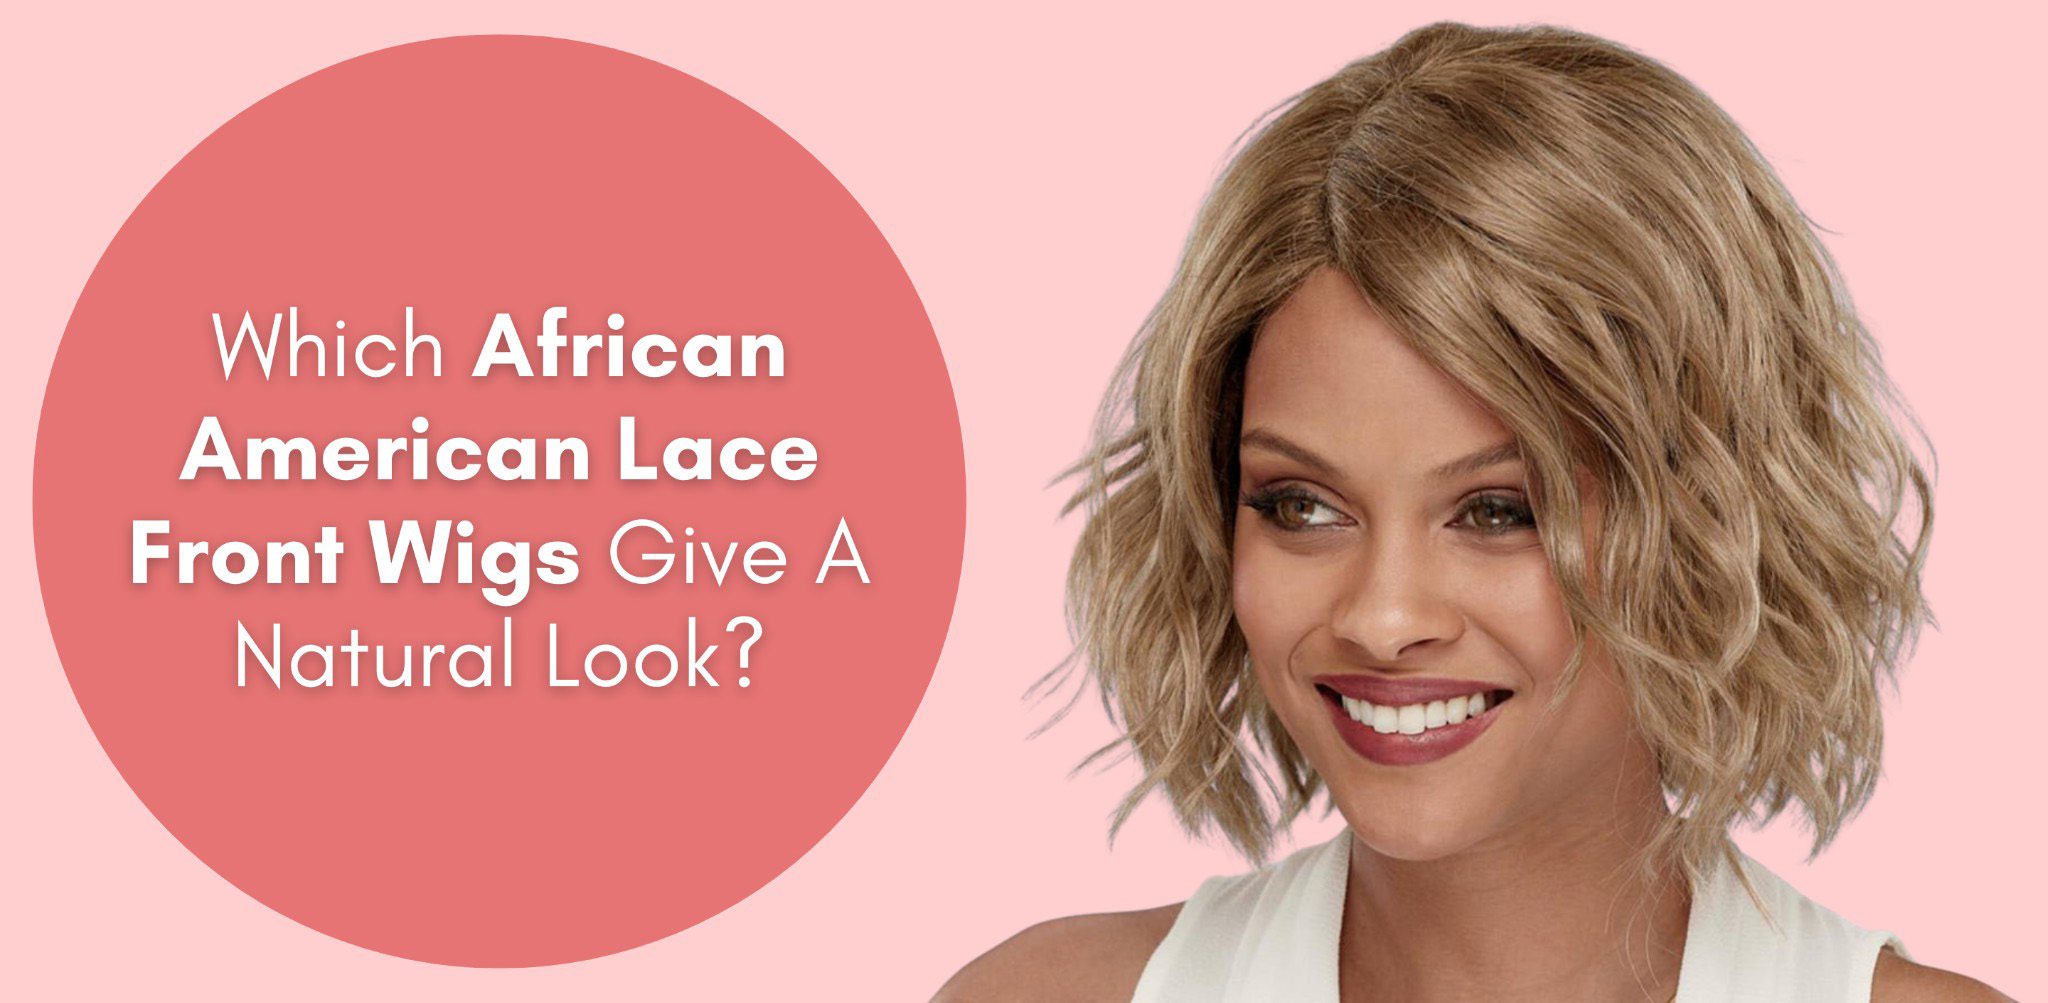 Which African American Lace Front Wigs Give A Natural Look?